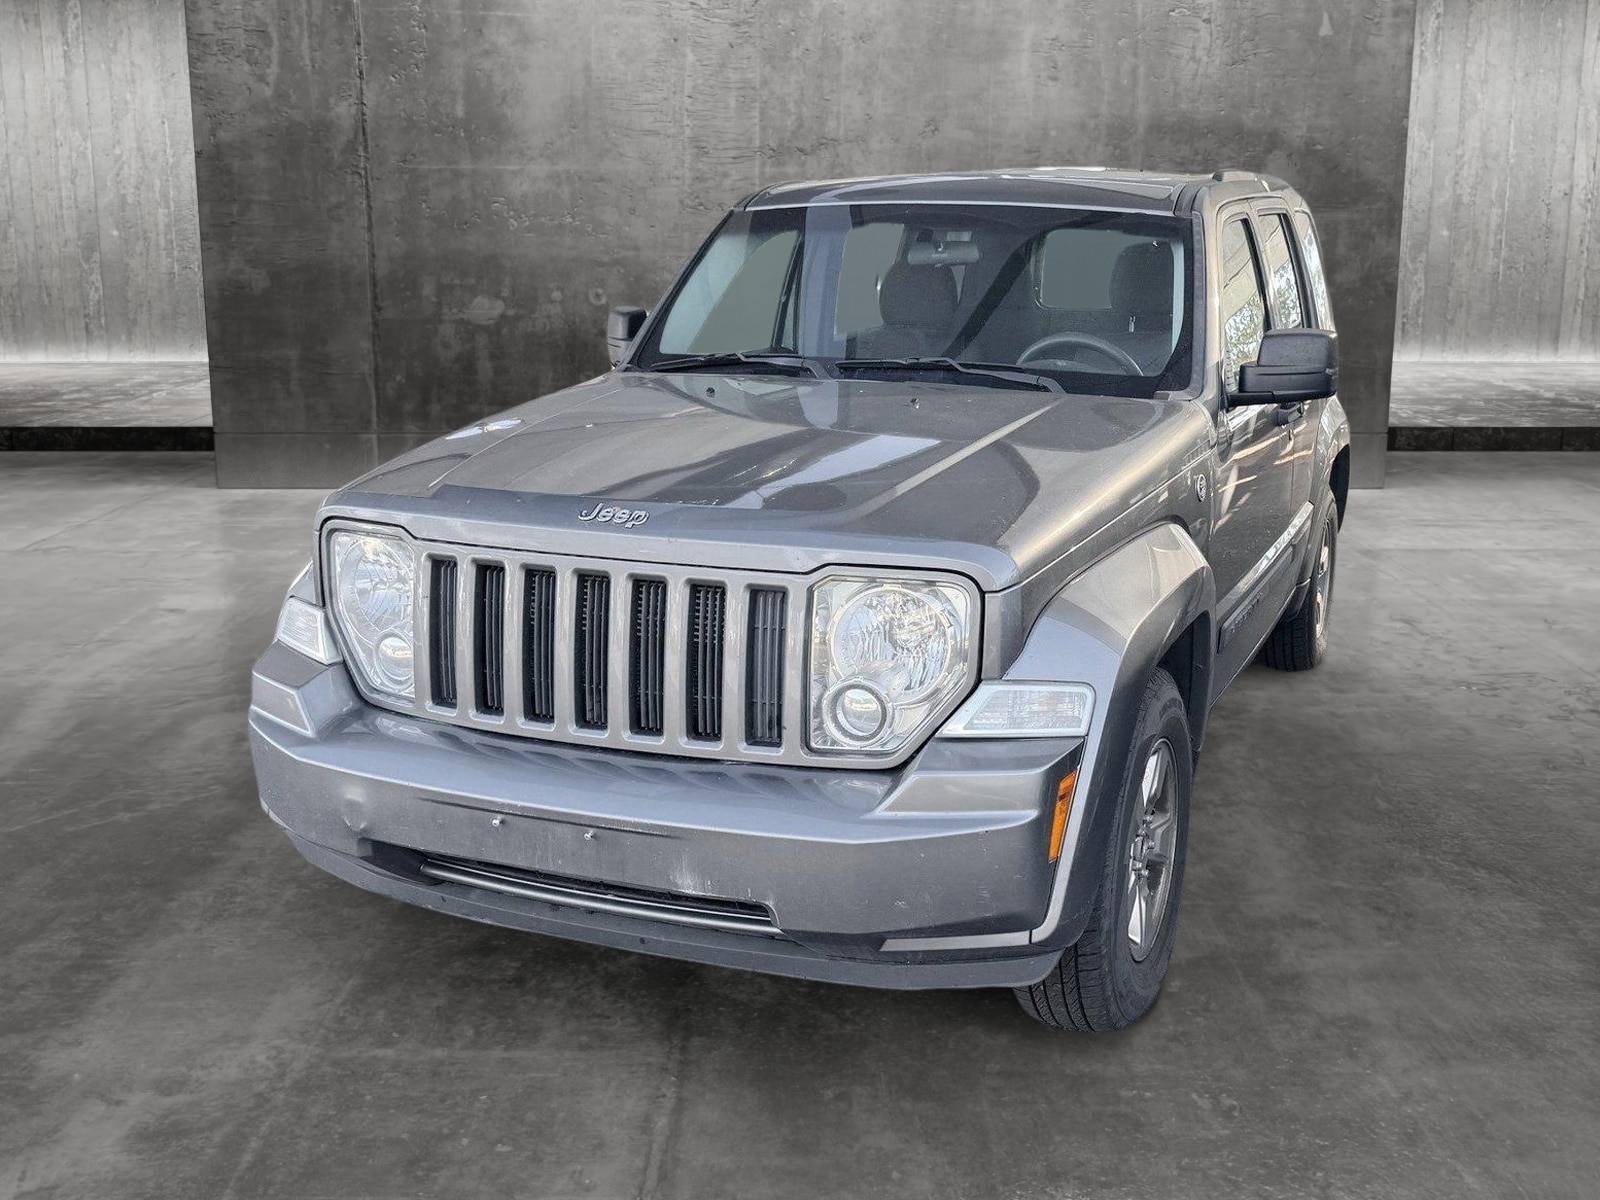 Used 2012 Jeep Liberty Sport with VIN 1C4PJMAK0CW176700 for sale in Centennial, CO